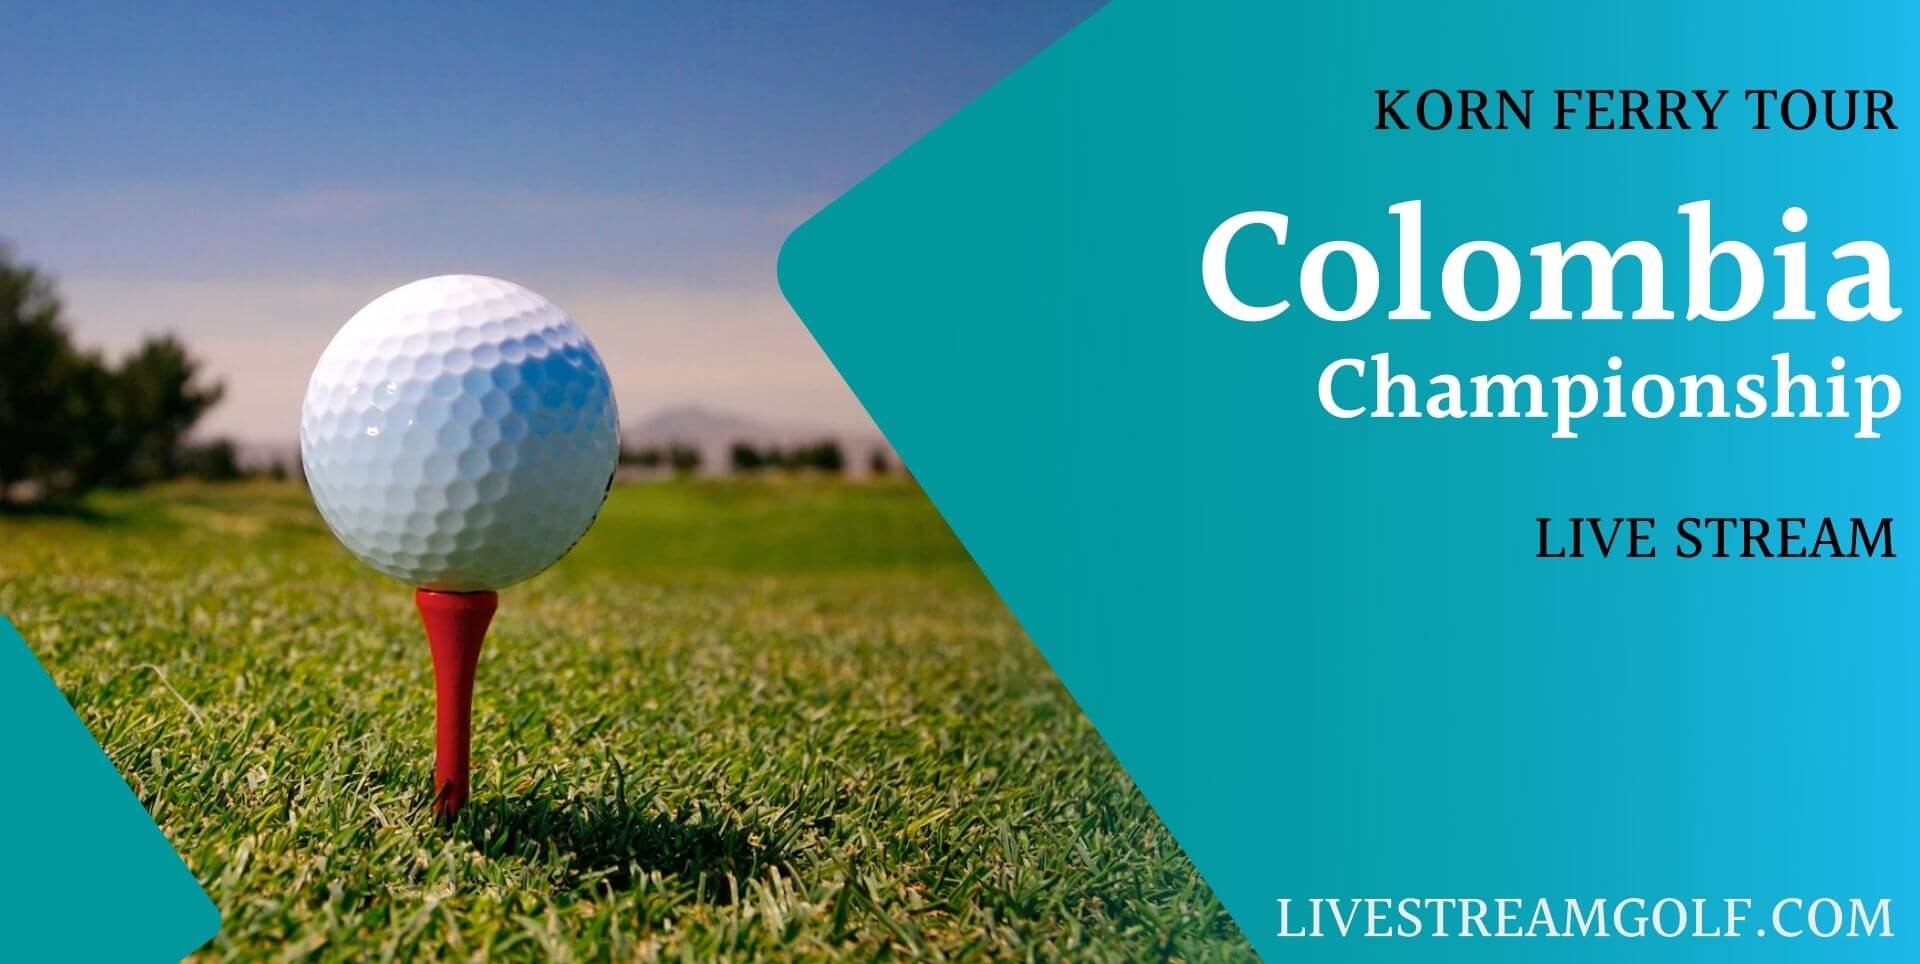 Colombia Championship Live Streaming Korn Ferry Golf